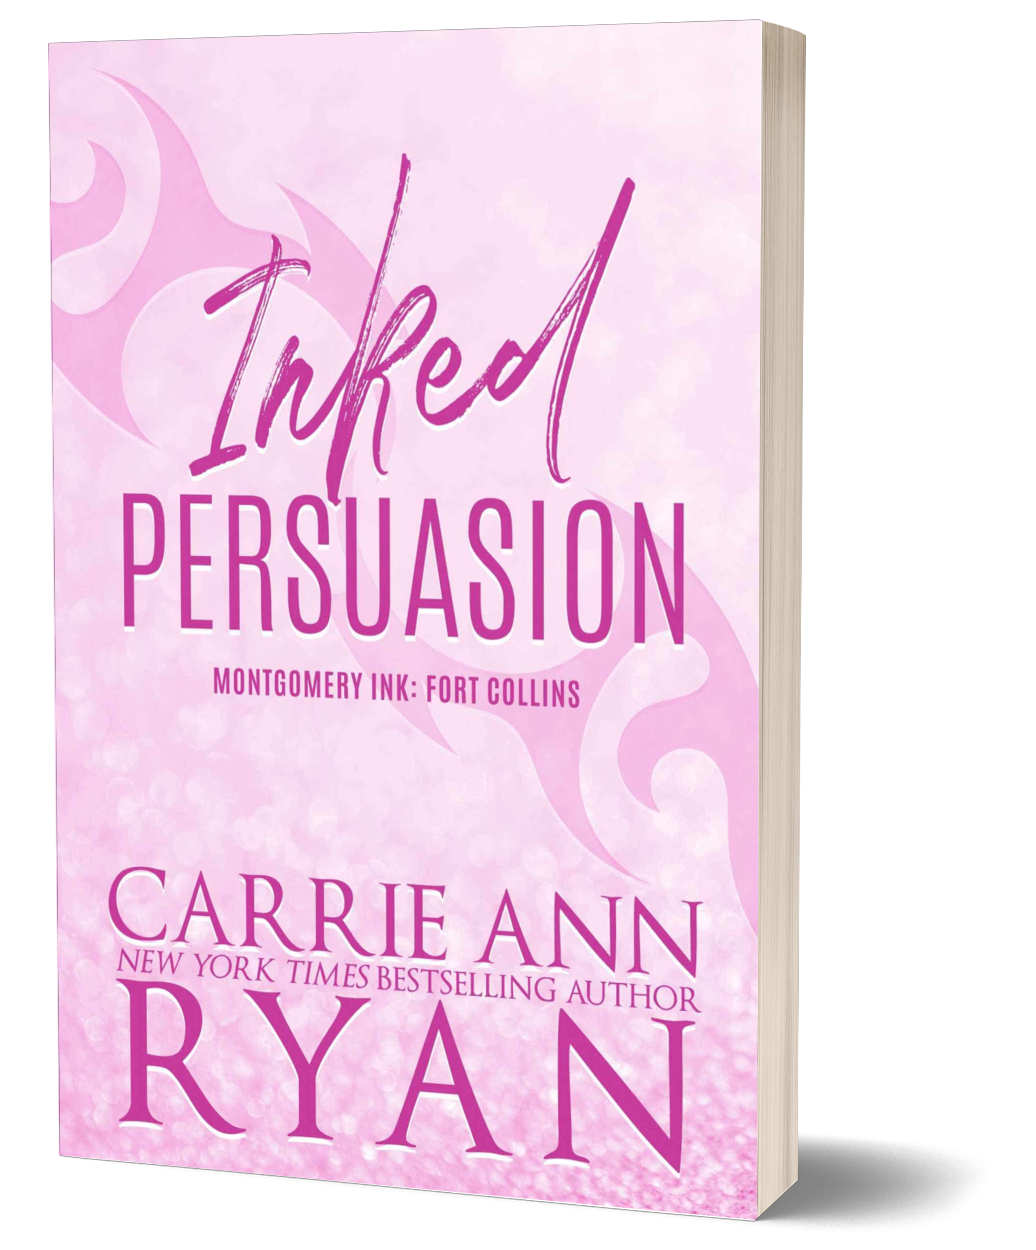 Inked Persuasion - Special Edition Paperback